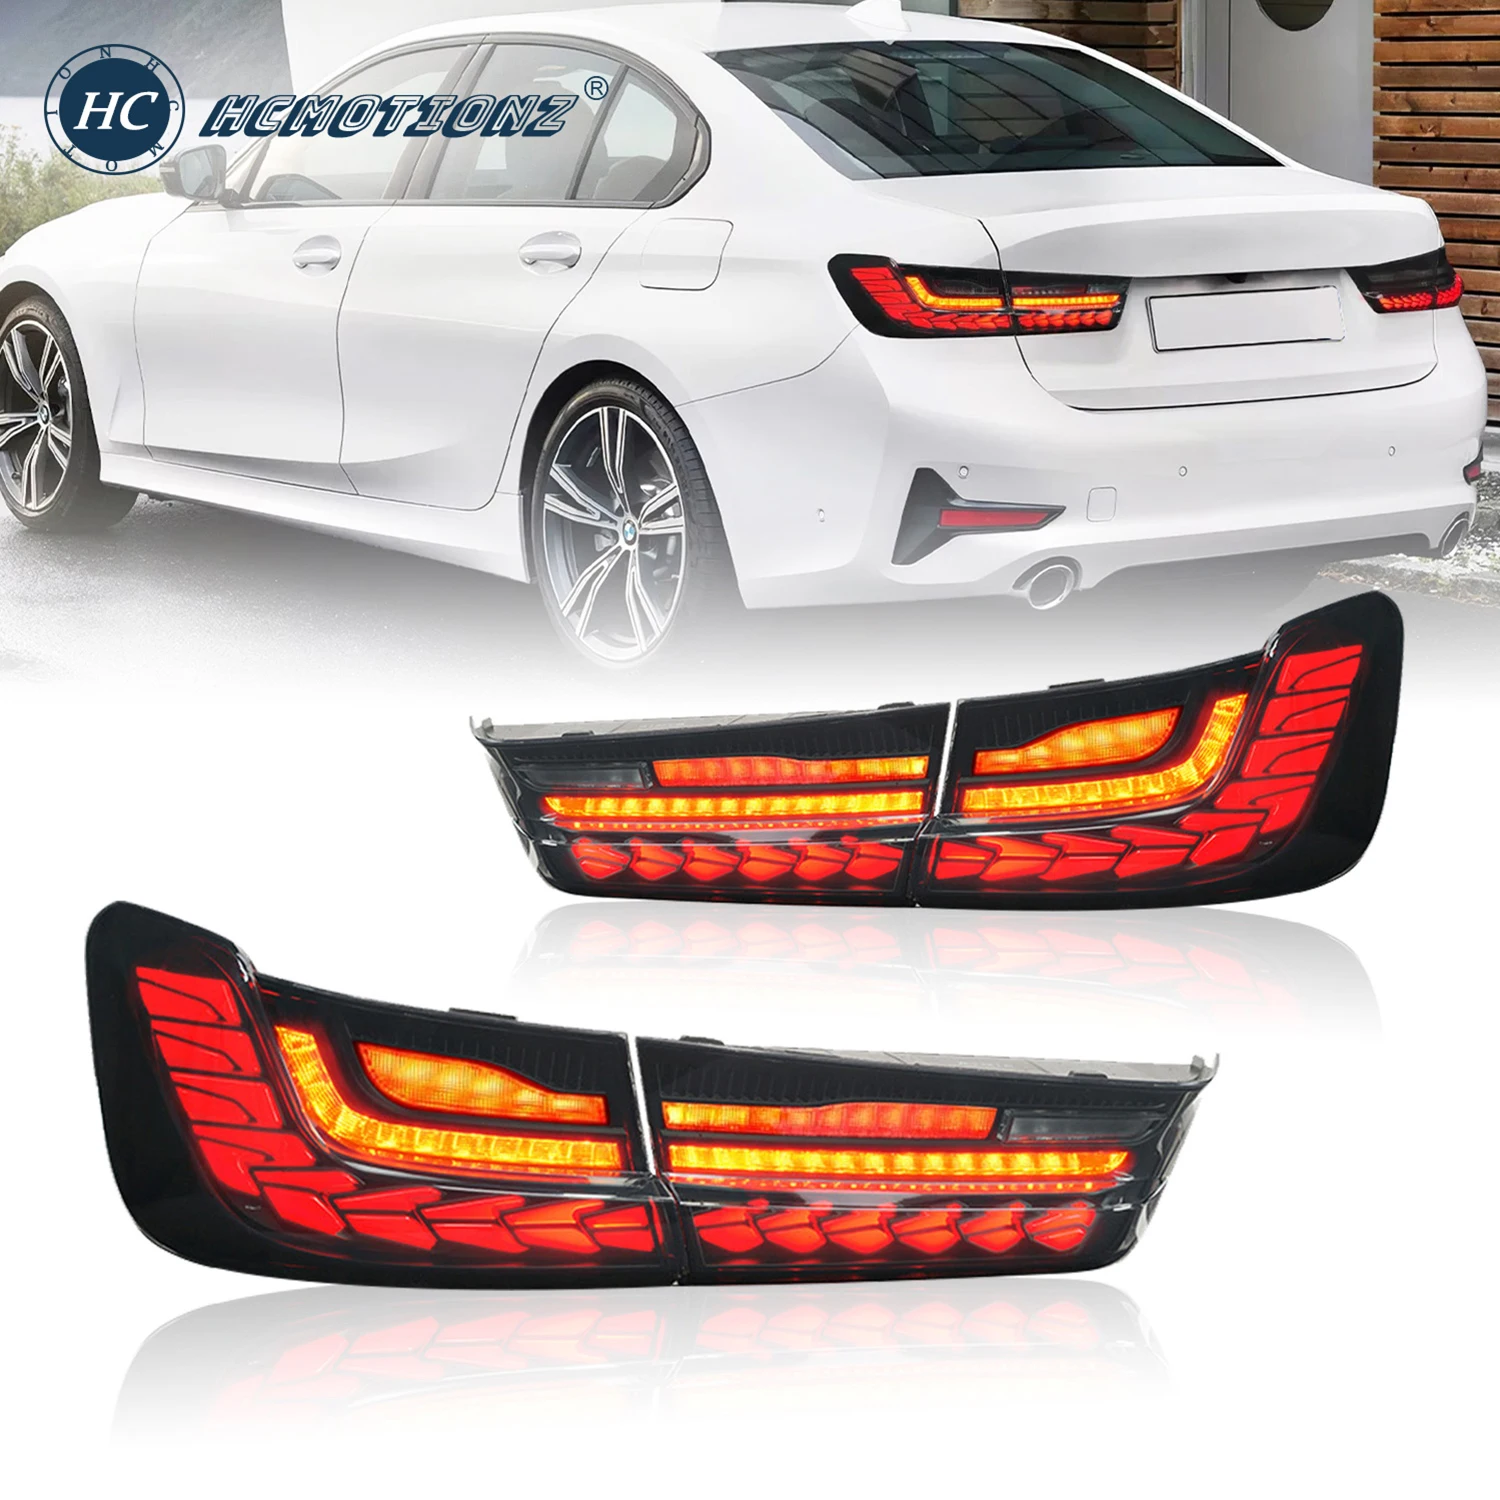 HCMOTIONZ Auto LED Tail Light for BMW G20 G80 M3 3 Series DRL Start UP Animation Assembly Car Styling Rear Back Lamp Accessories